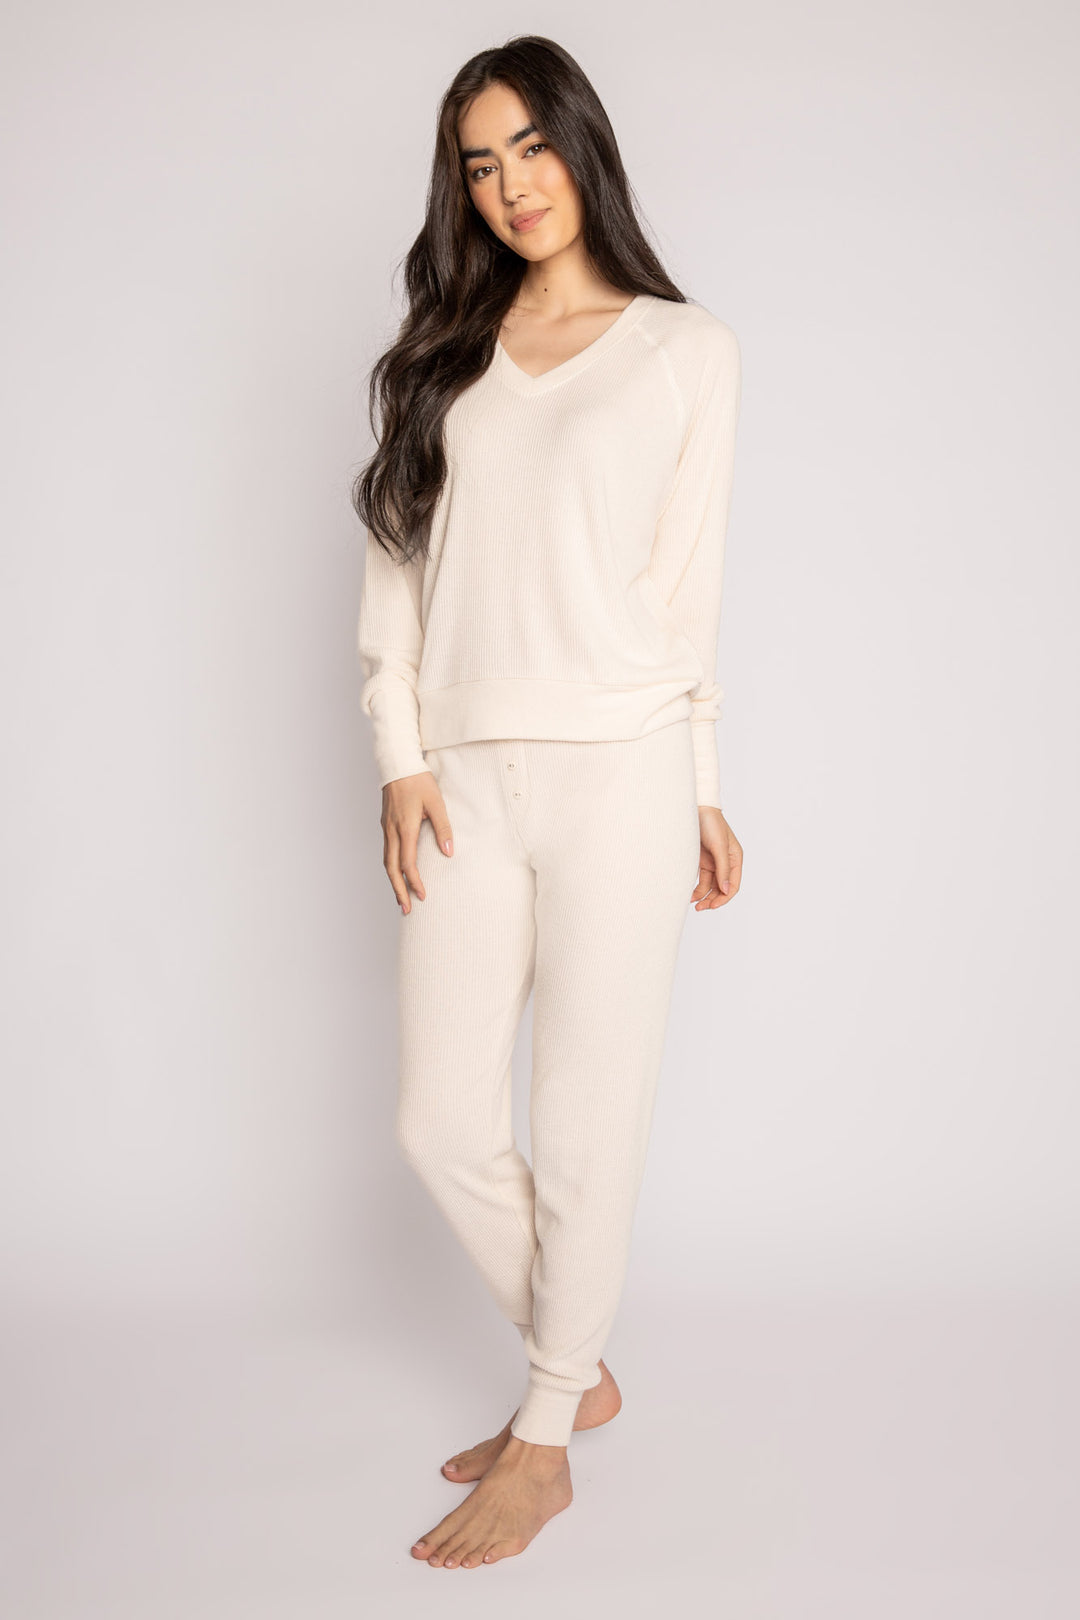 Ivory jammie set in 2x2 peachy rib with a slim fit jammie pant & V-neck long sleeve top. (7199532220516)